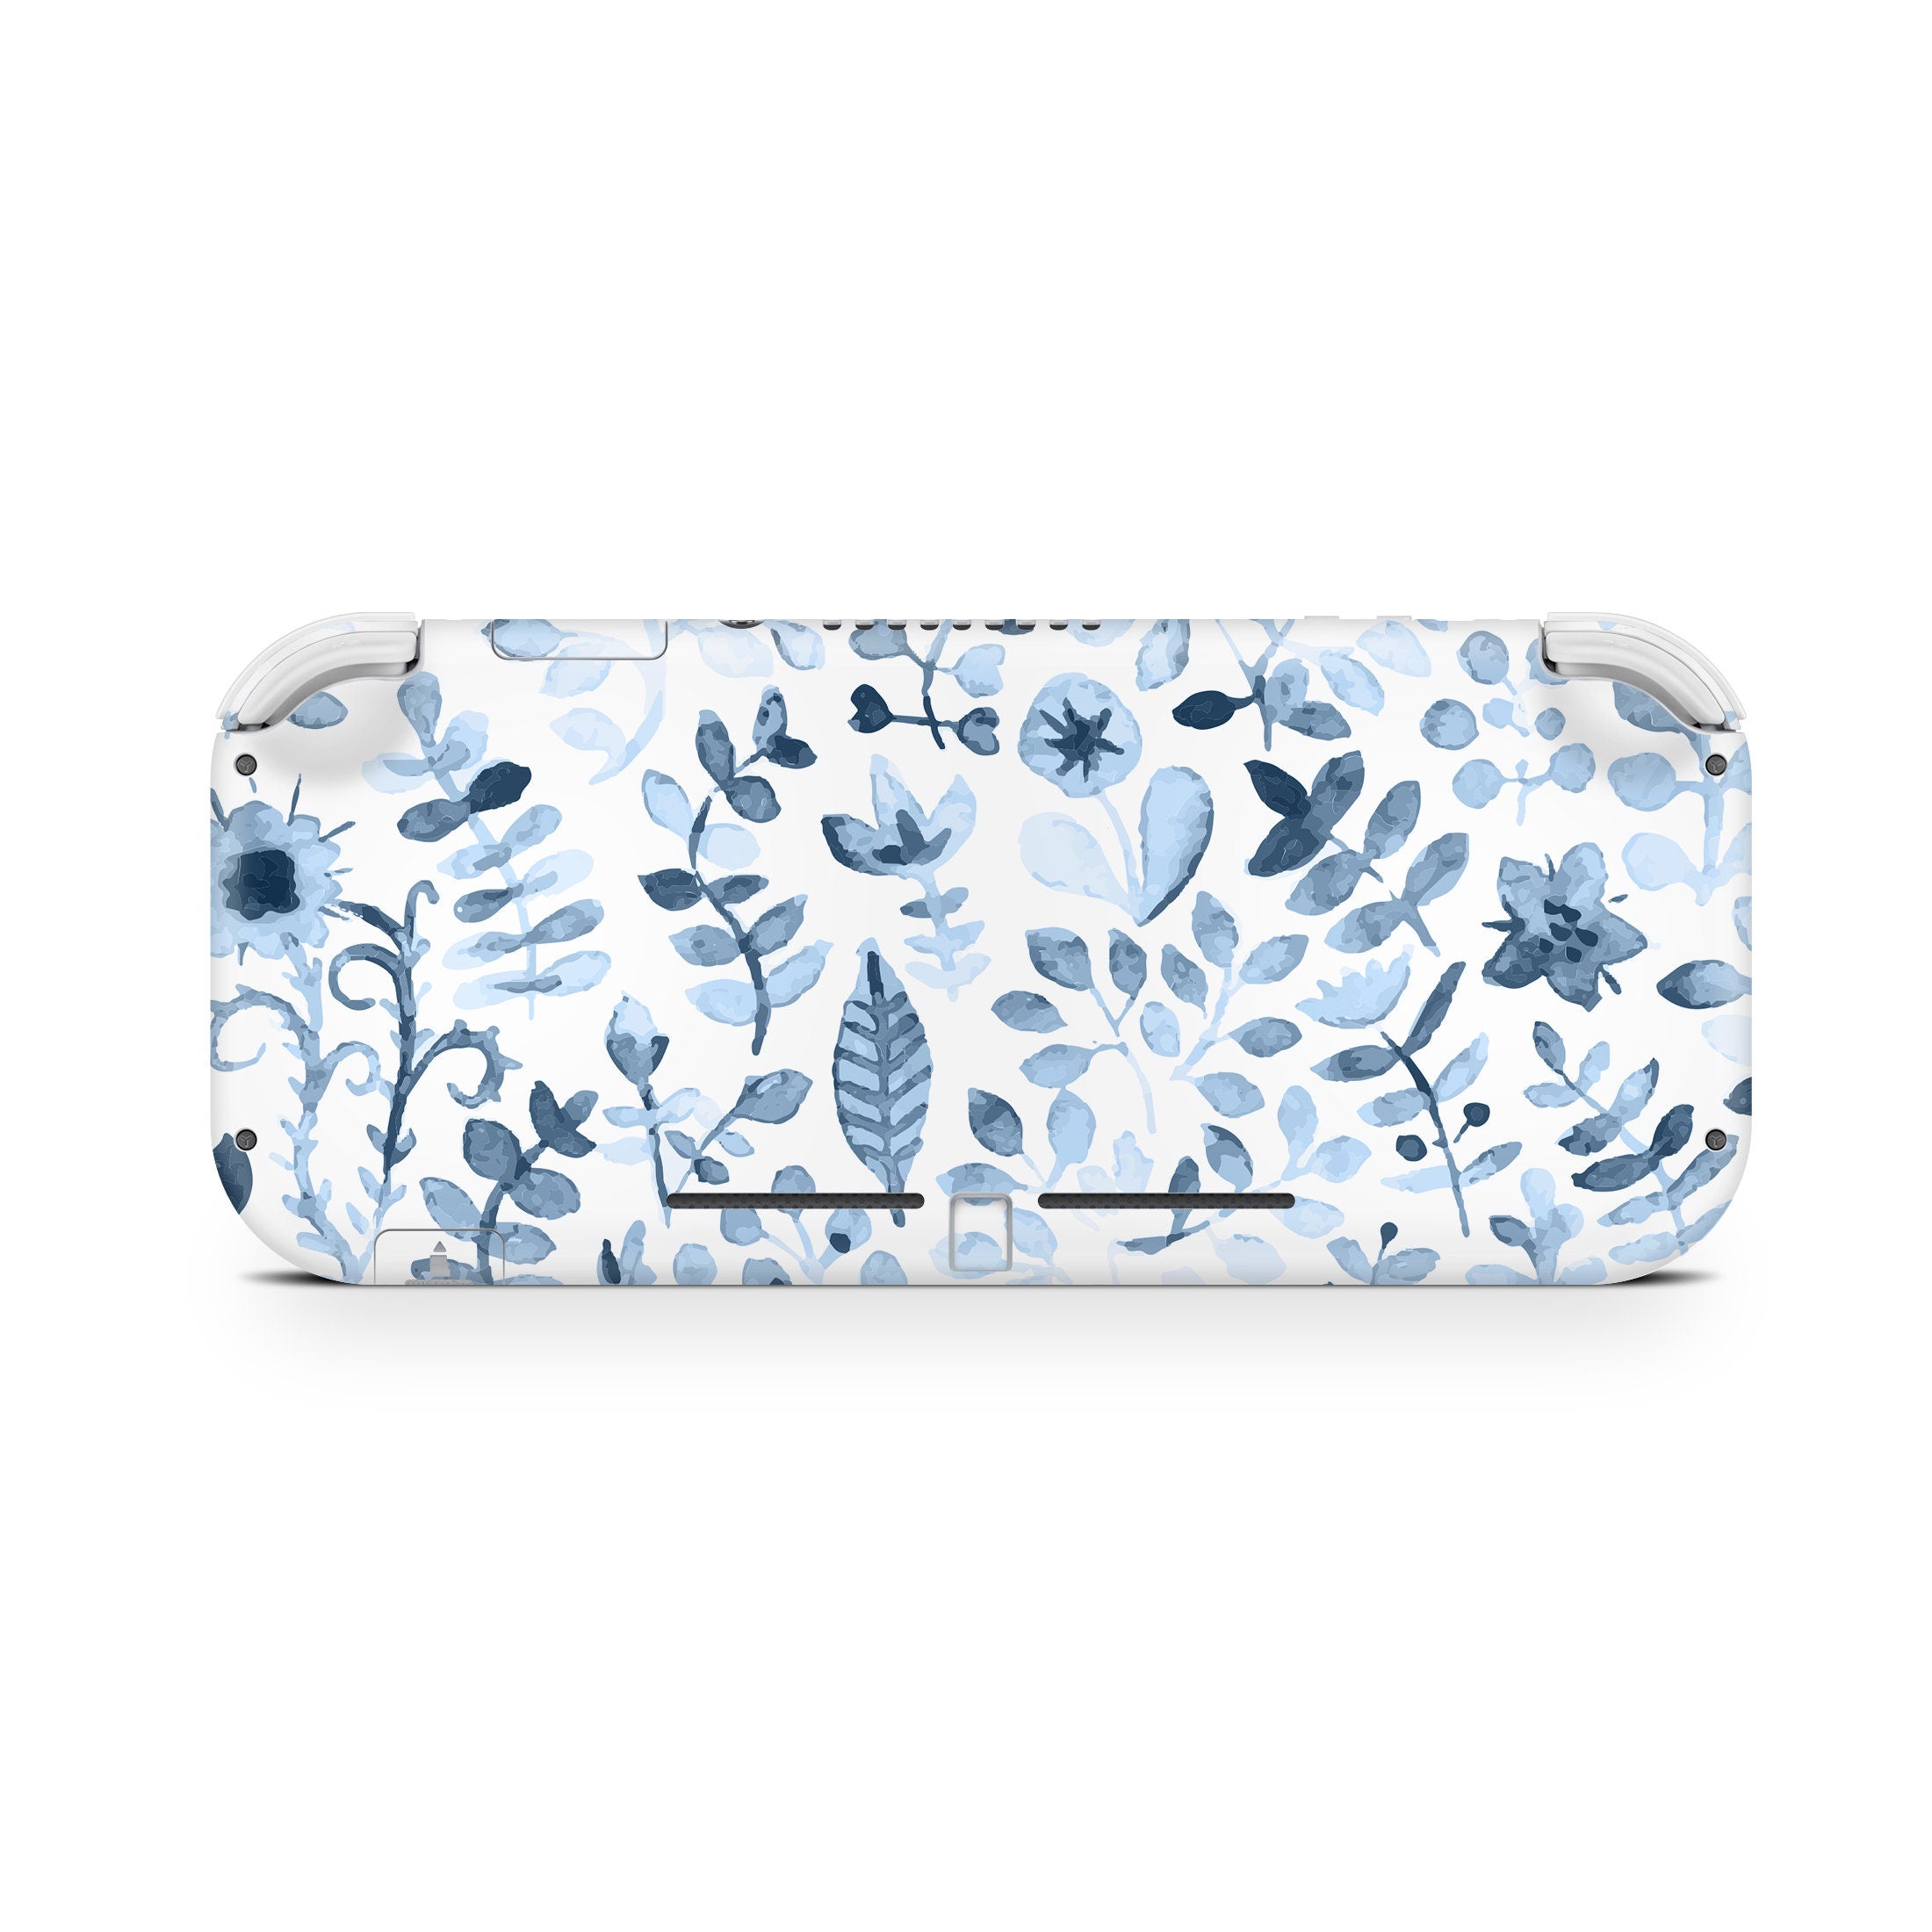 Nintendo switch Lite skin Watercolor, Flowers switches lite skin Full cover 3m